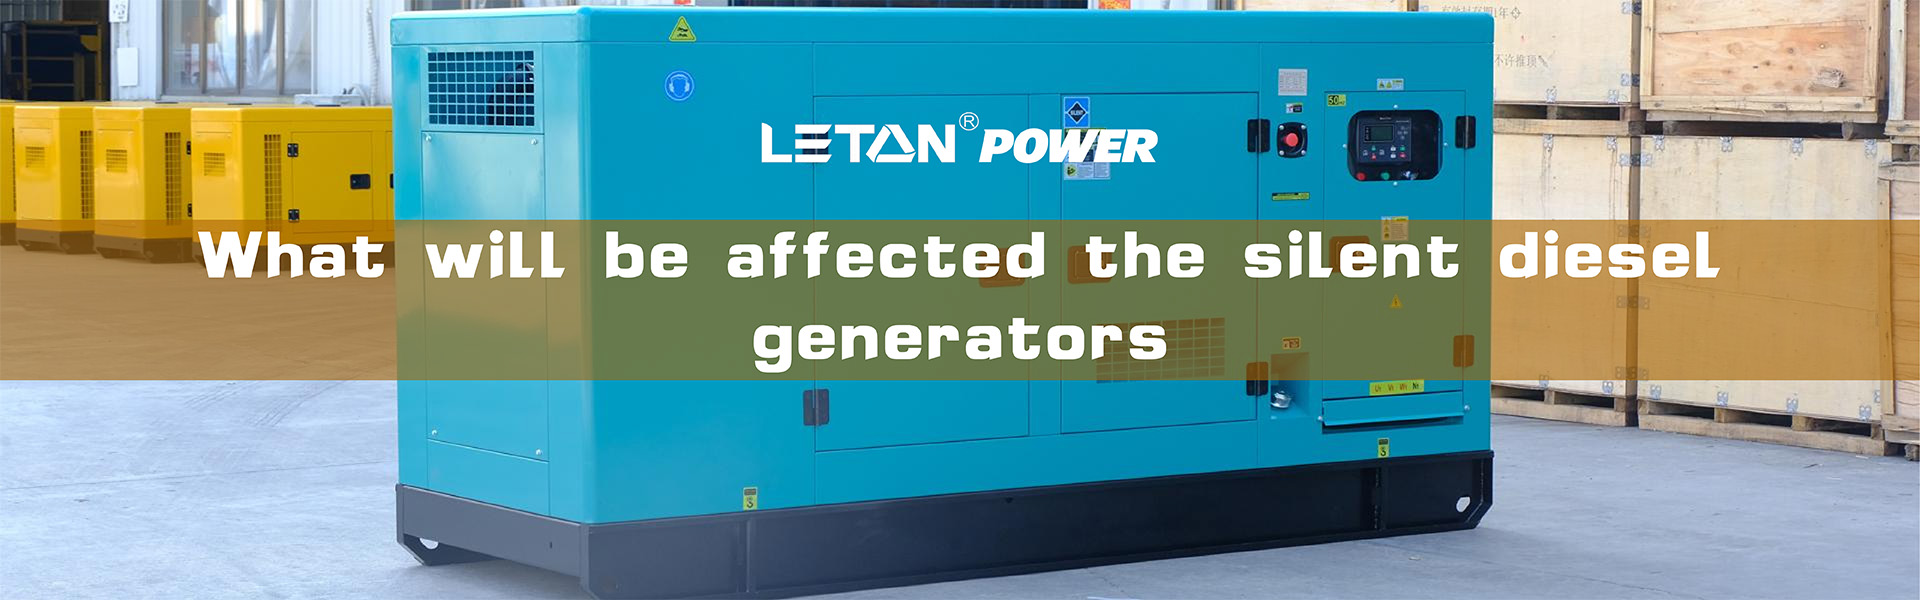 What will be affected the silent diesel generators